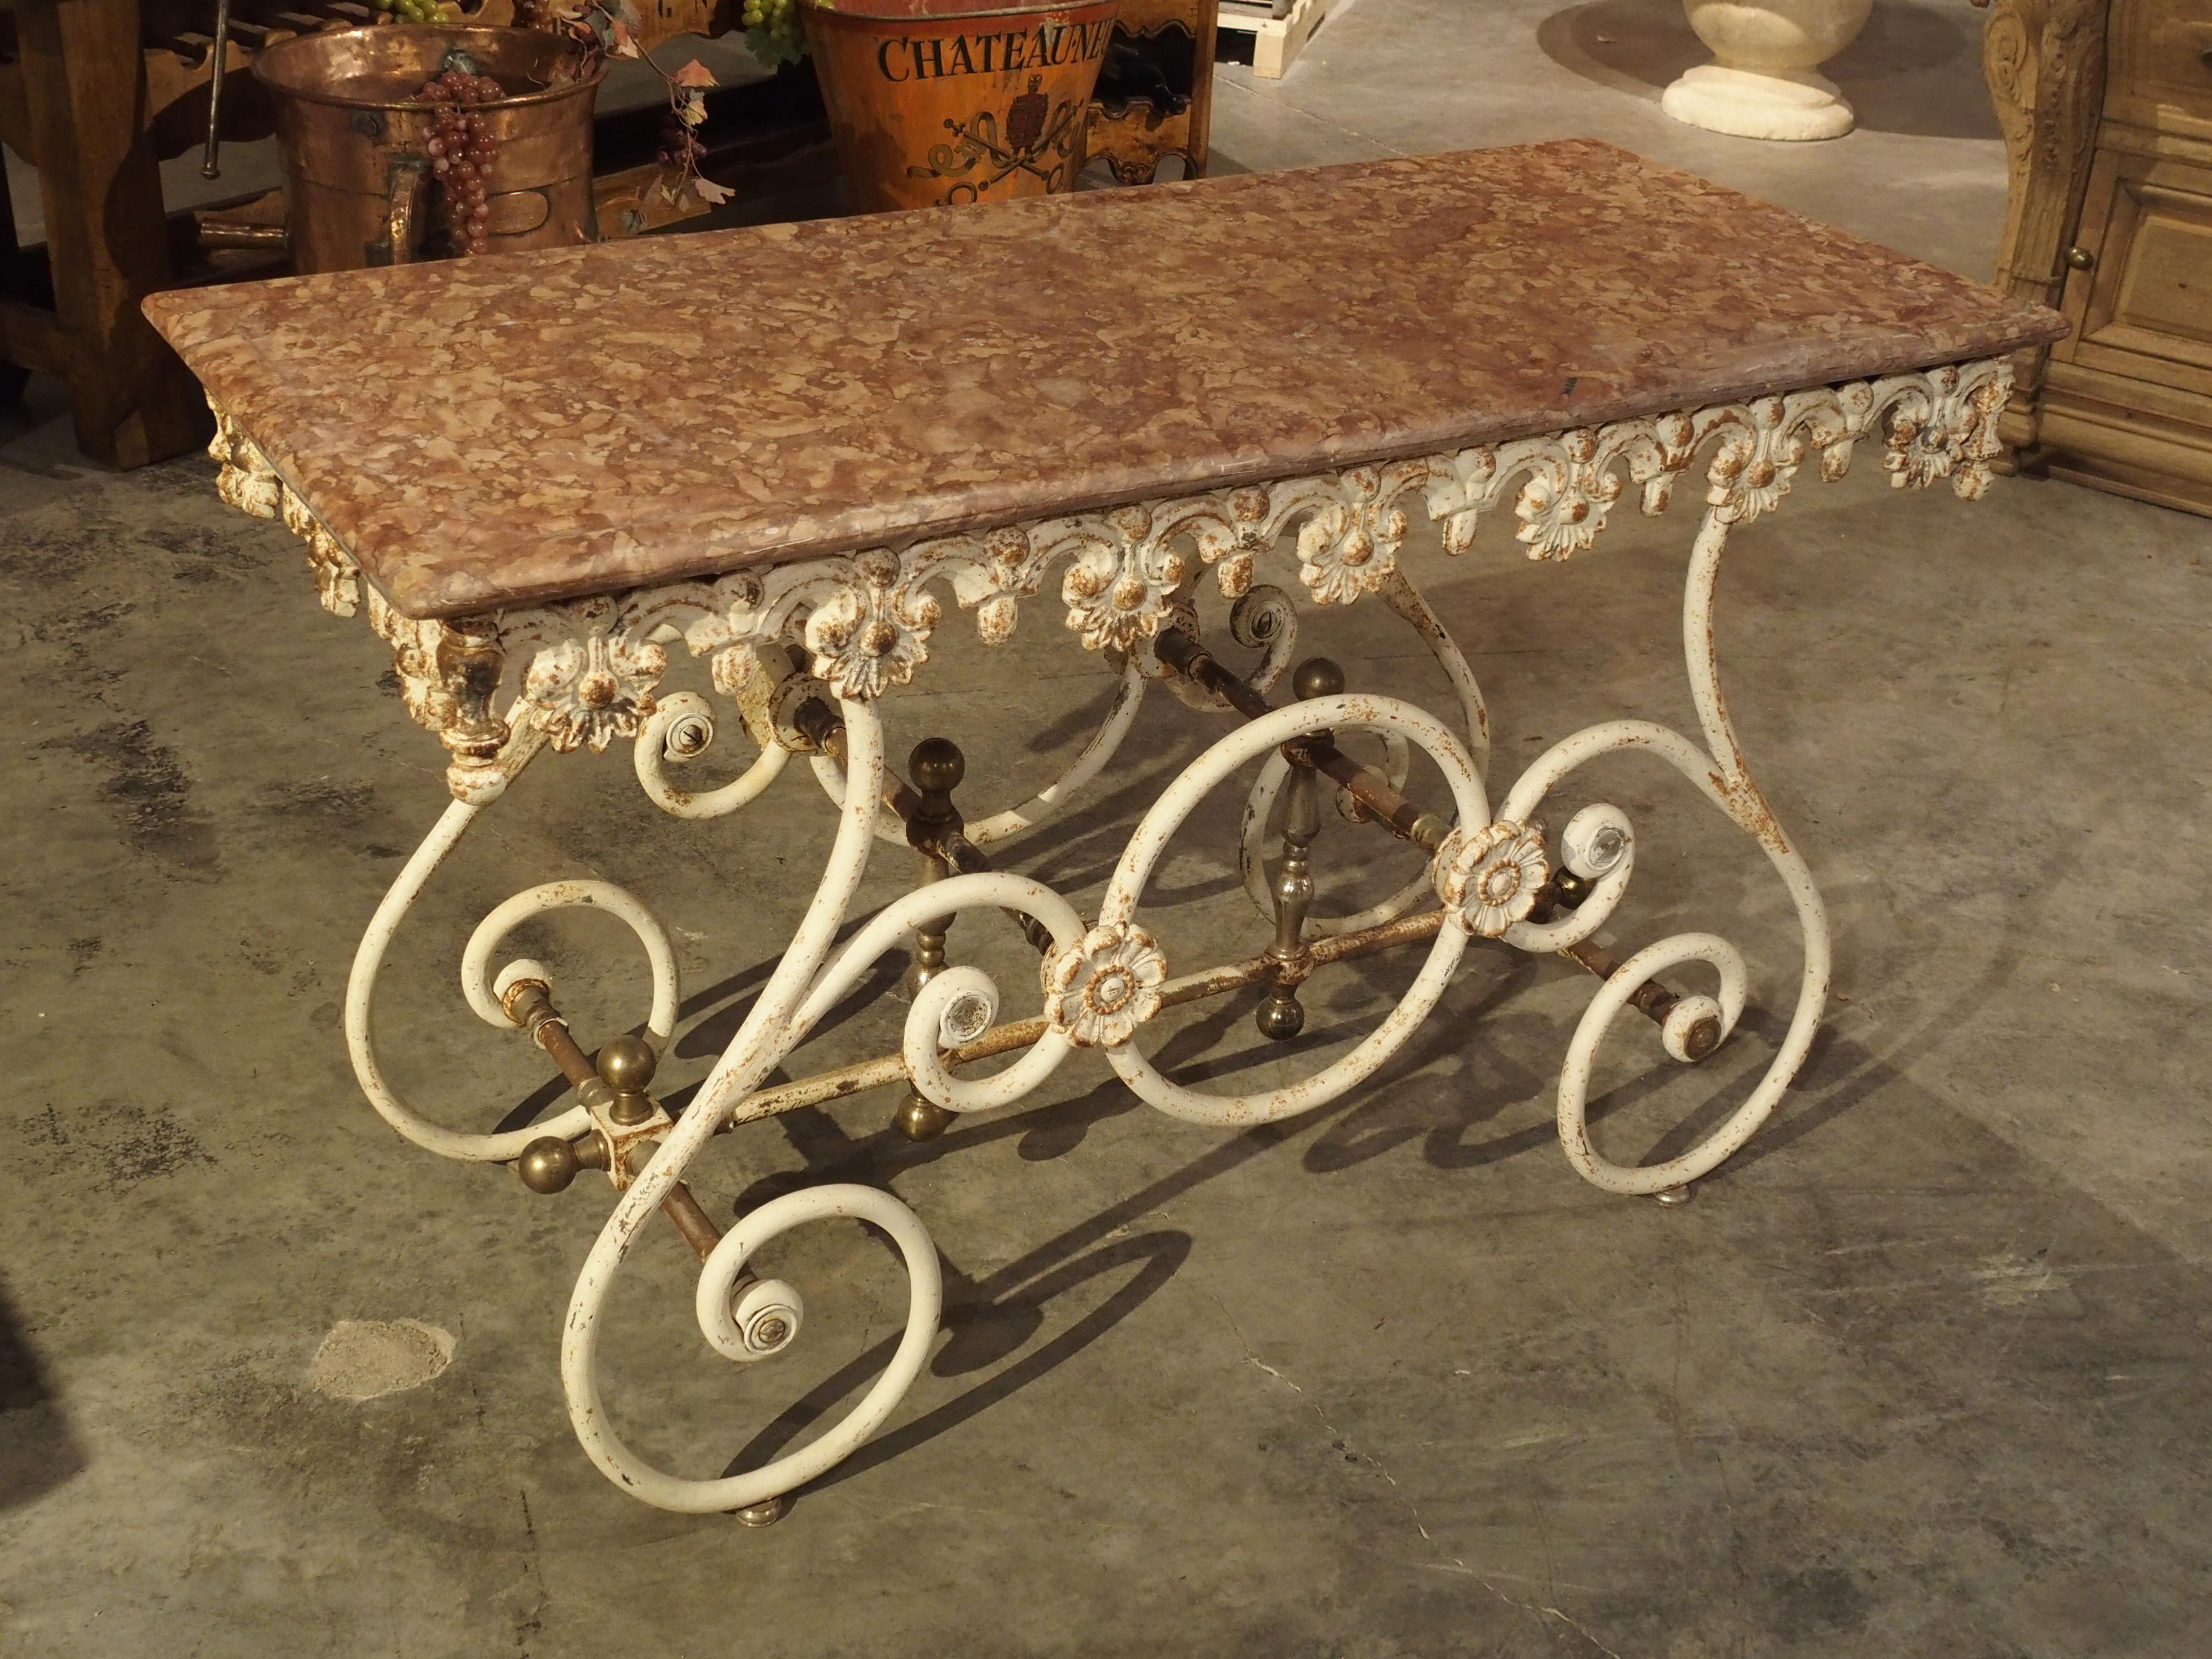 This is an unusual antique French pastry or butchers table in that it is quite shallow in depth, has a beautiful Rosso Verona marble, and has a base composed of large swooping C-Scroll wrought iron legs. Tables of this category are sometimes